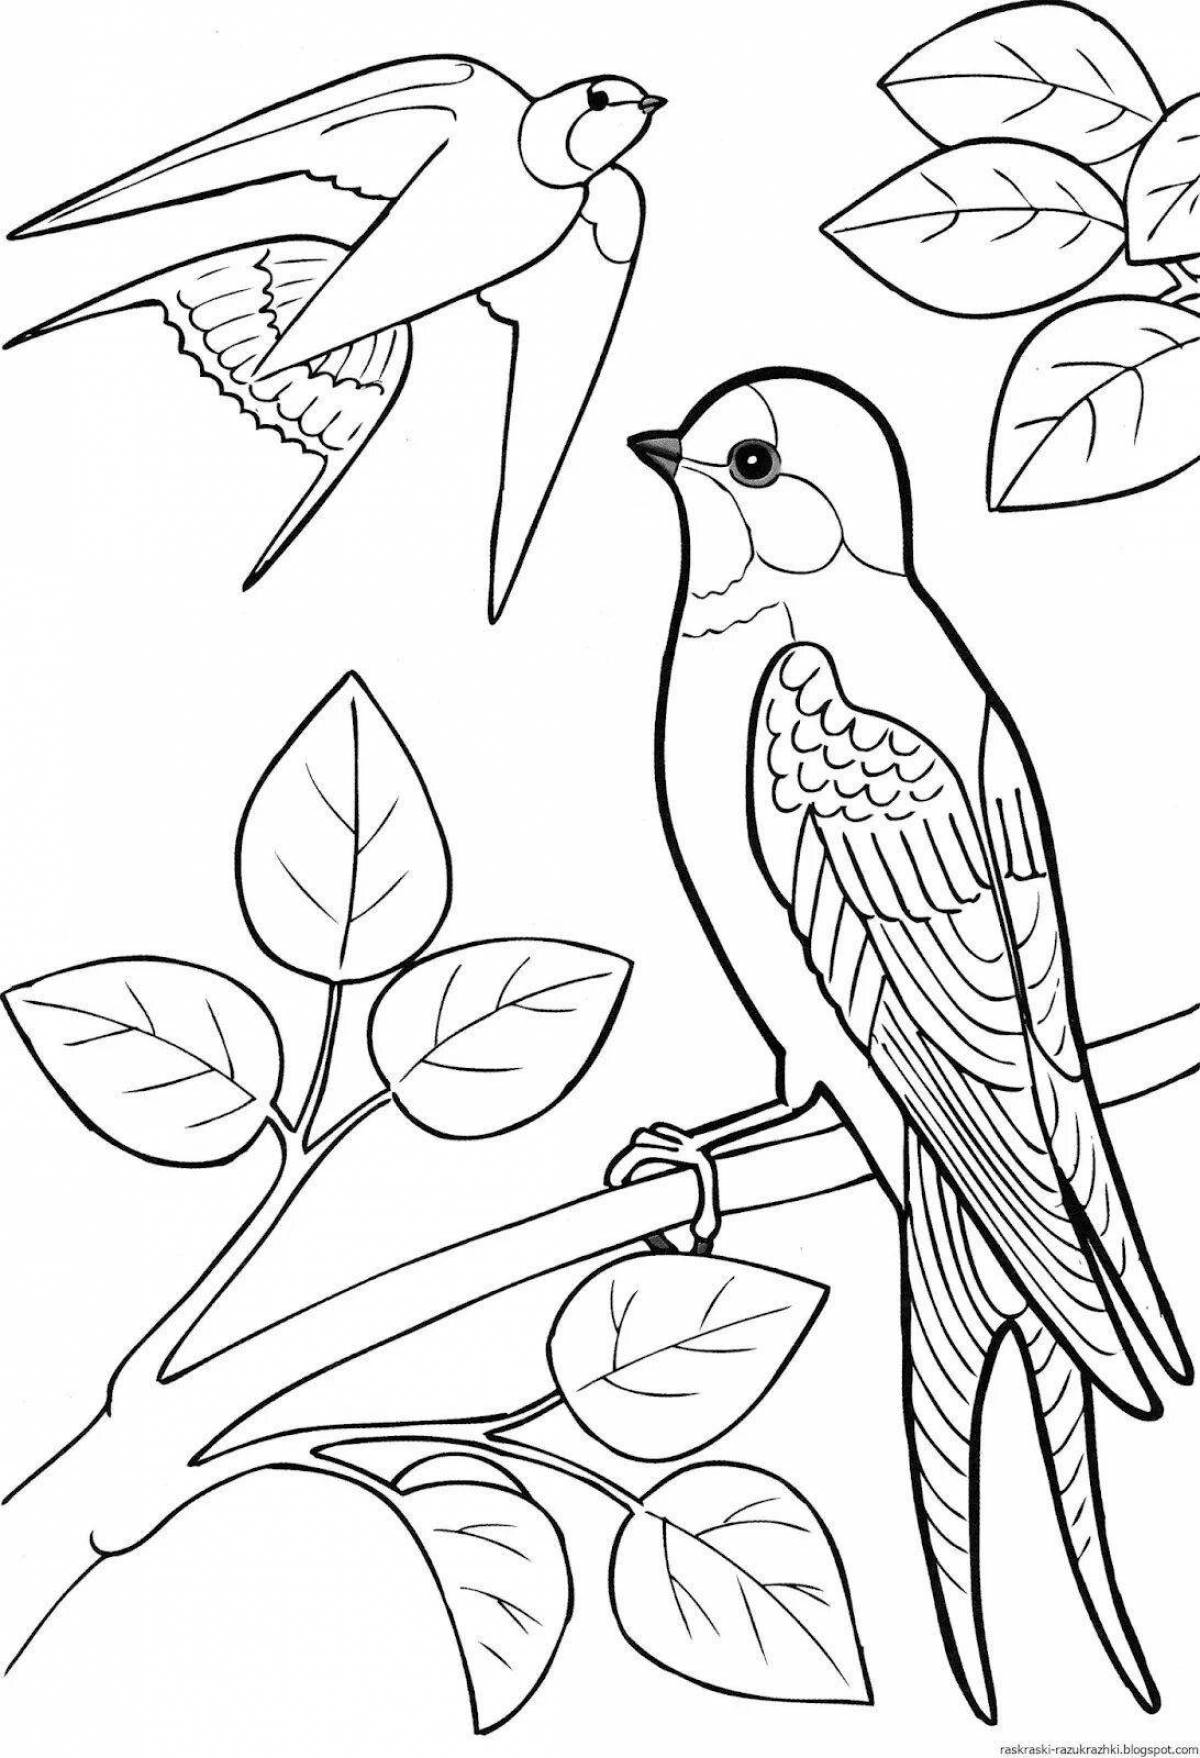 Colorful migratory birds coloring pages for kids